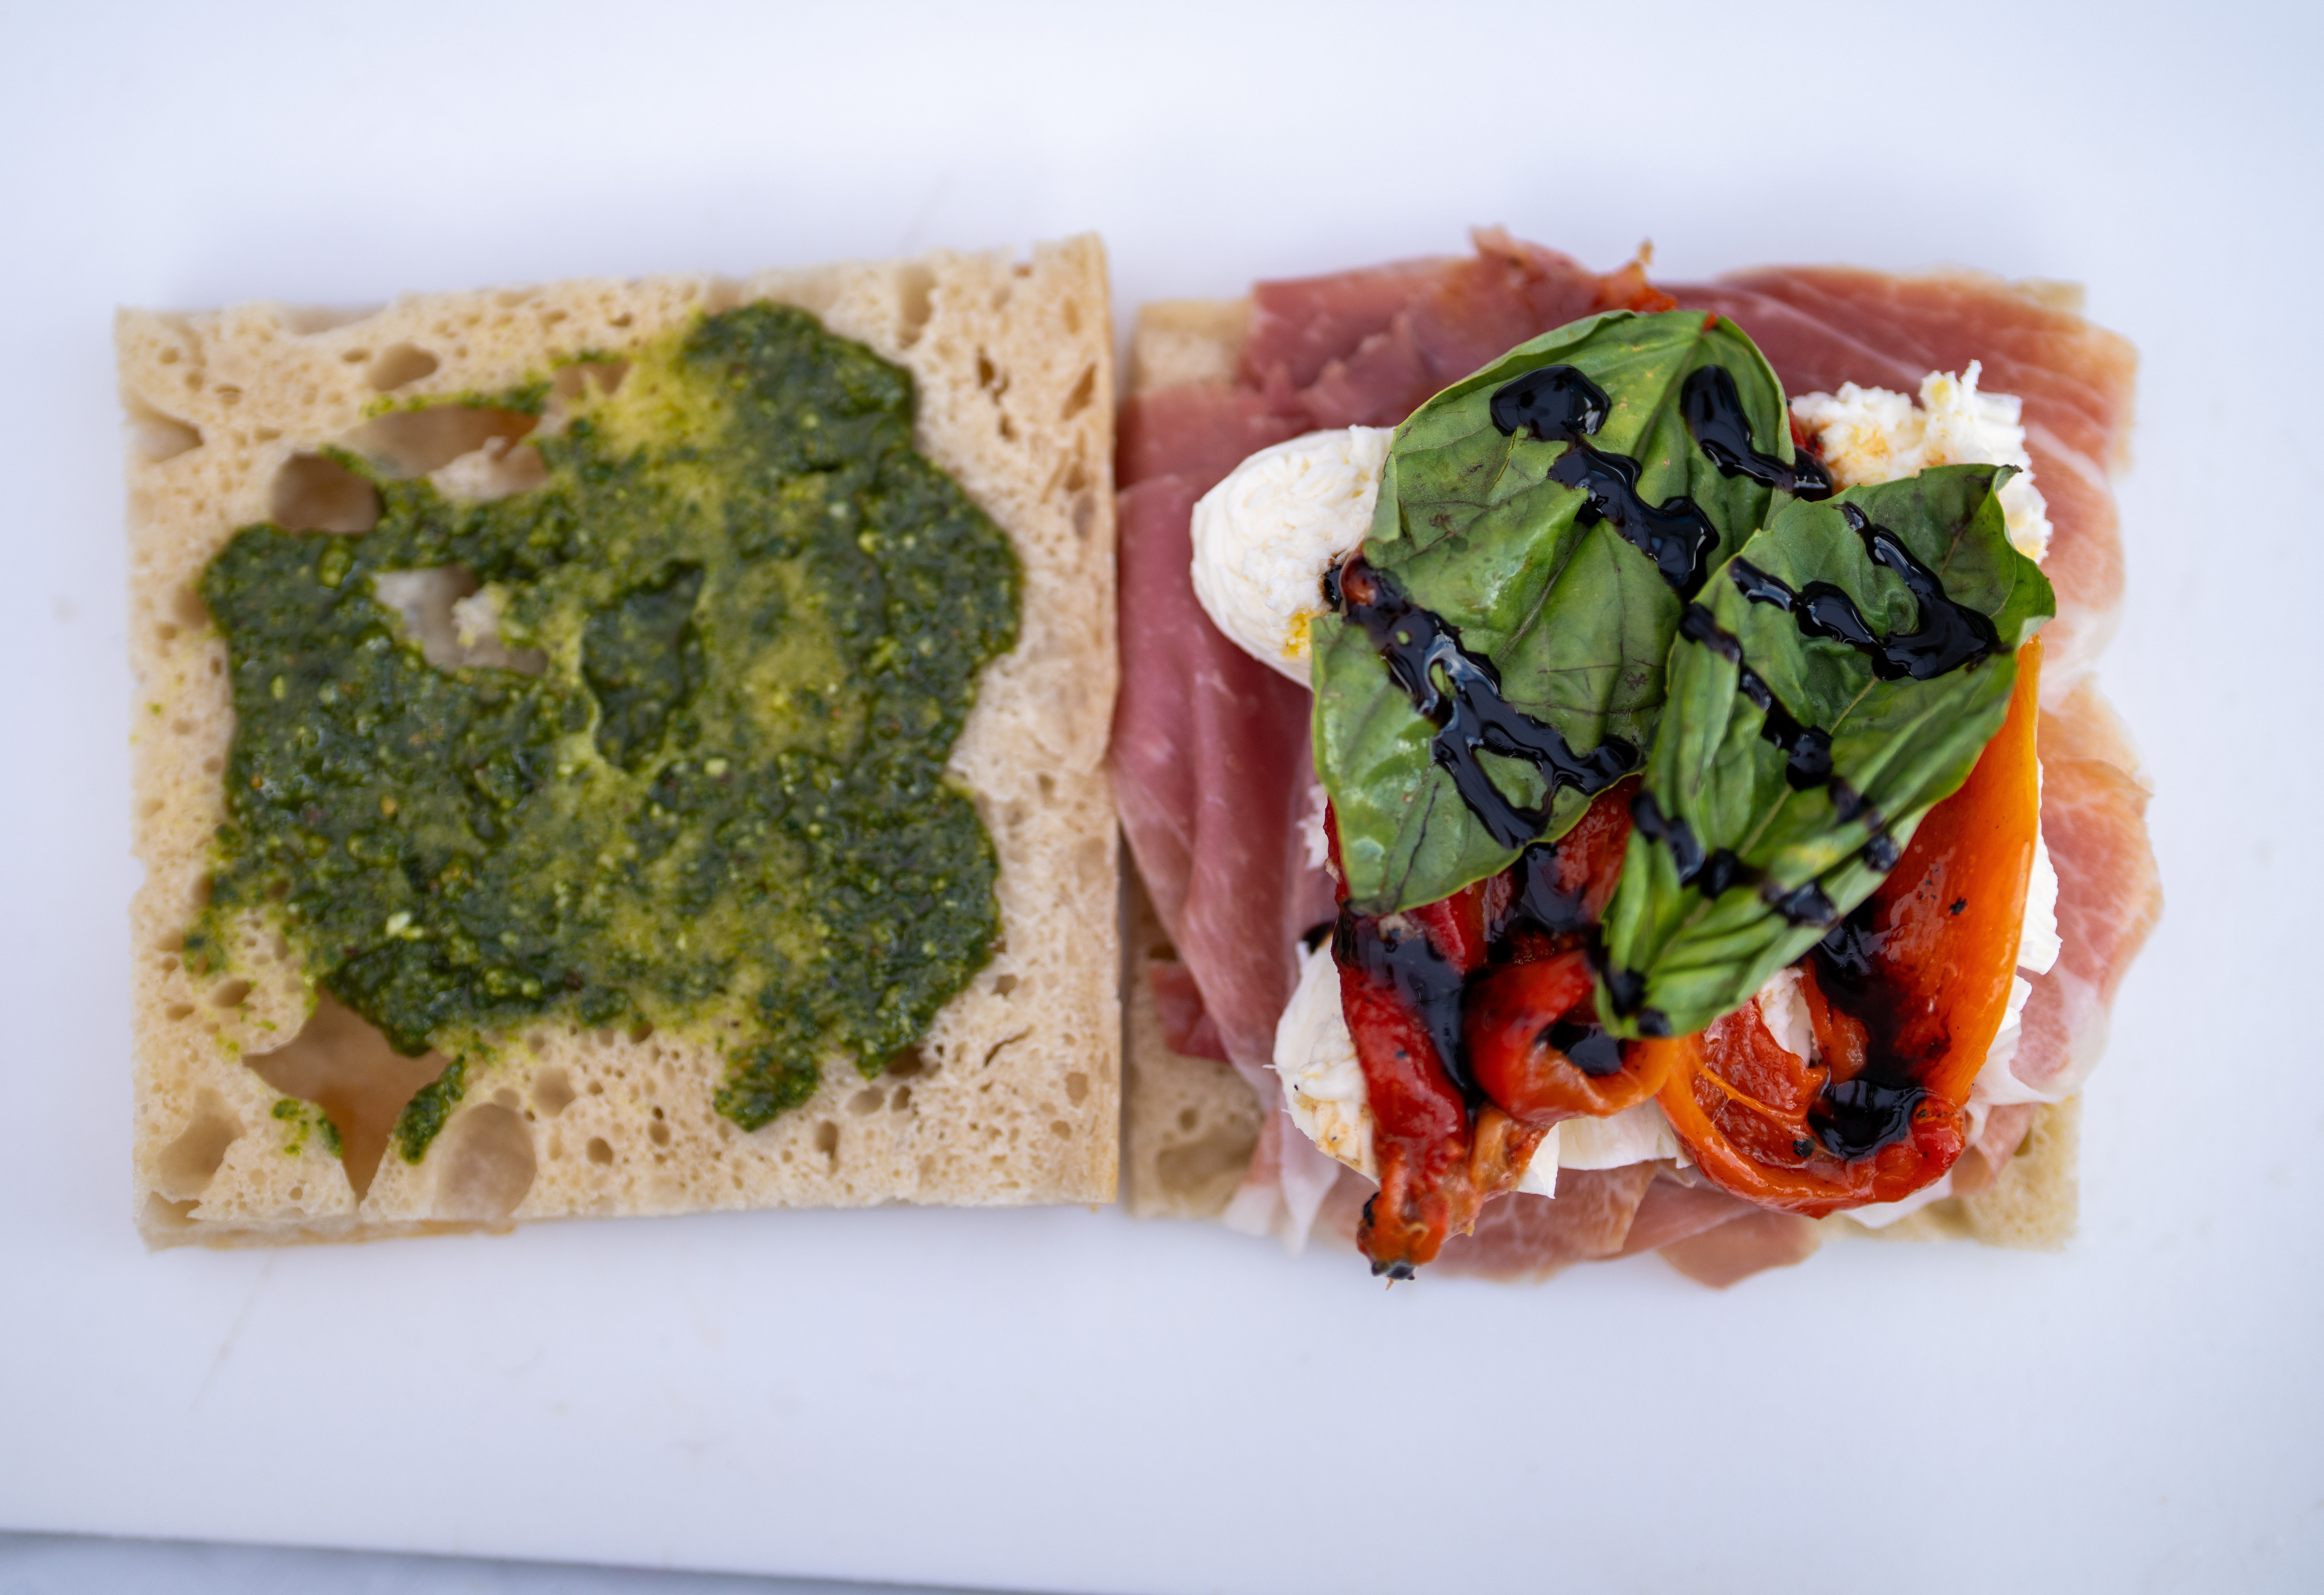 Overhead view of an open-faced sandwich; one side is slathered with pesto and the other layered with prosciutto, fresh mozzarella, red peppers, basil, and a balsamic glaze.